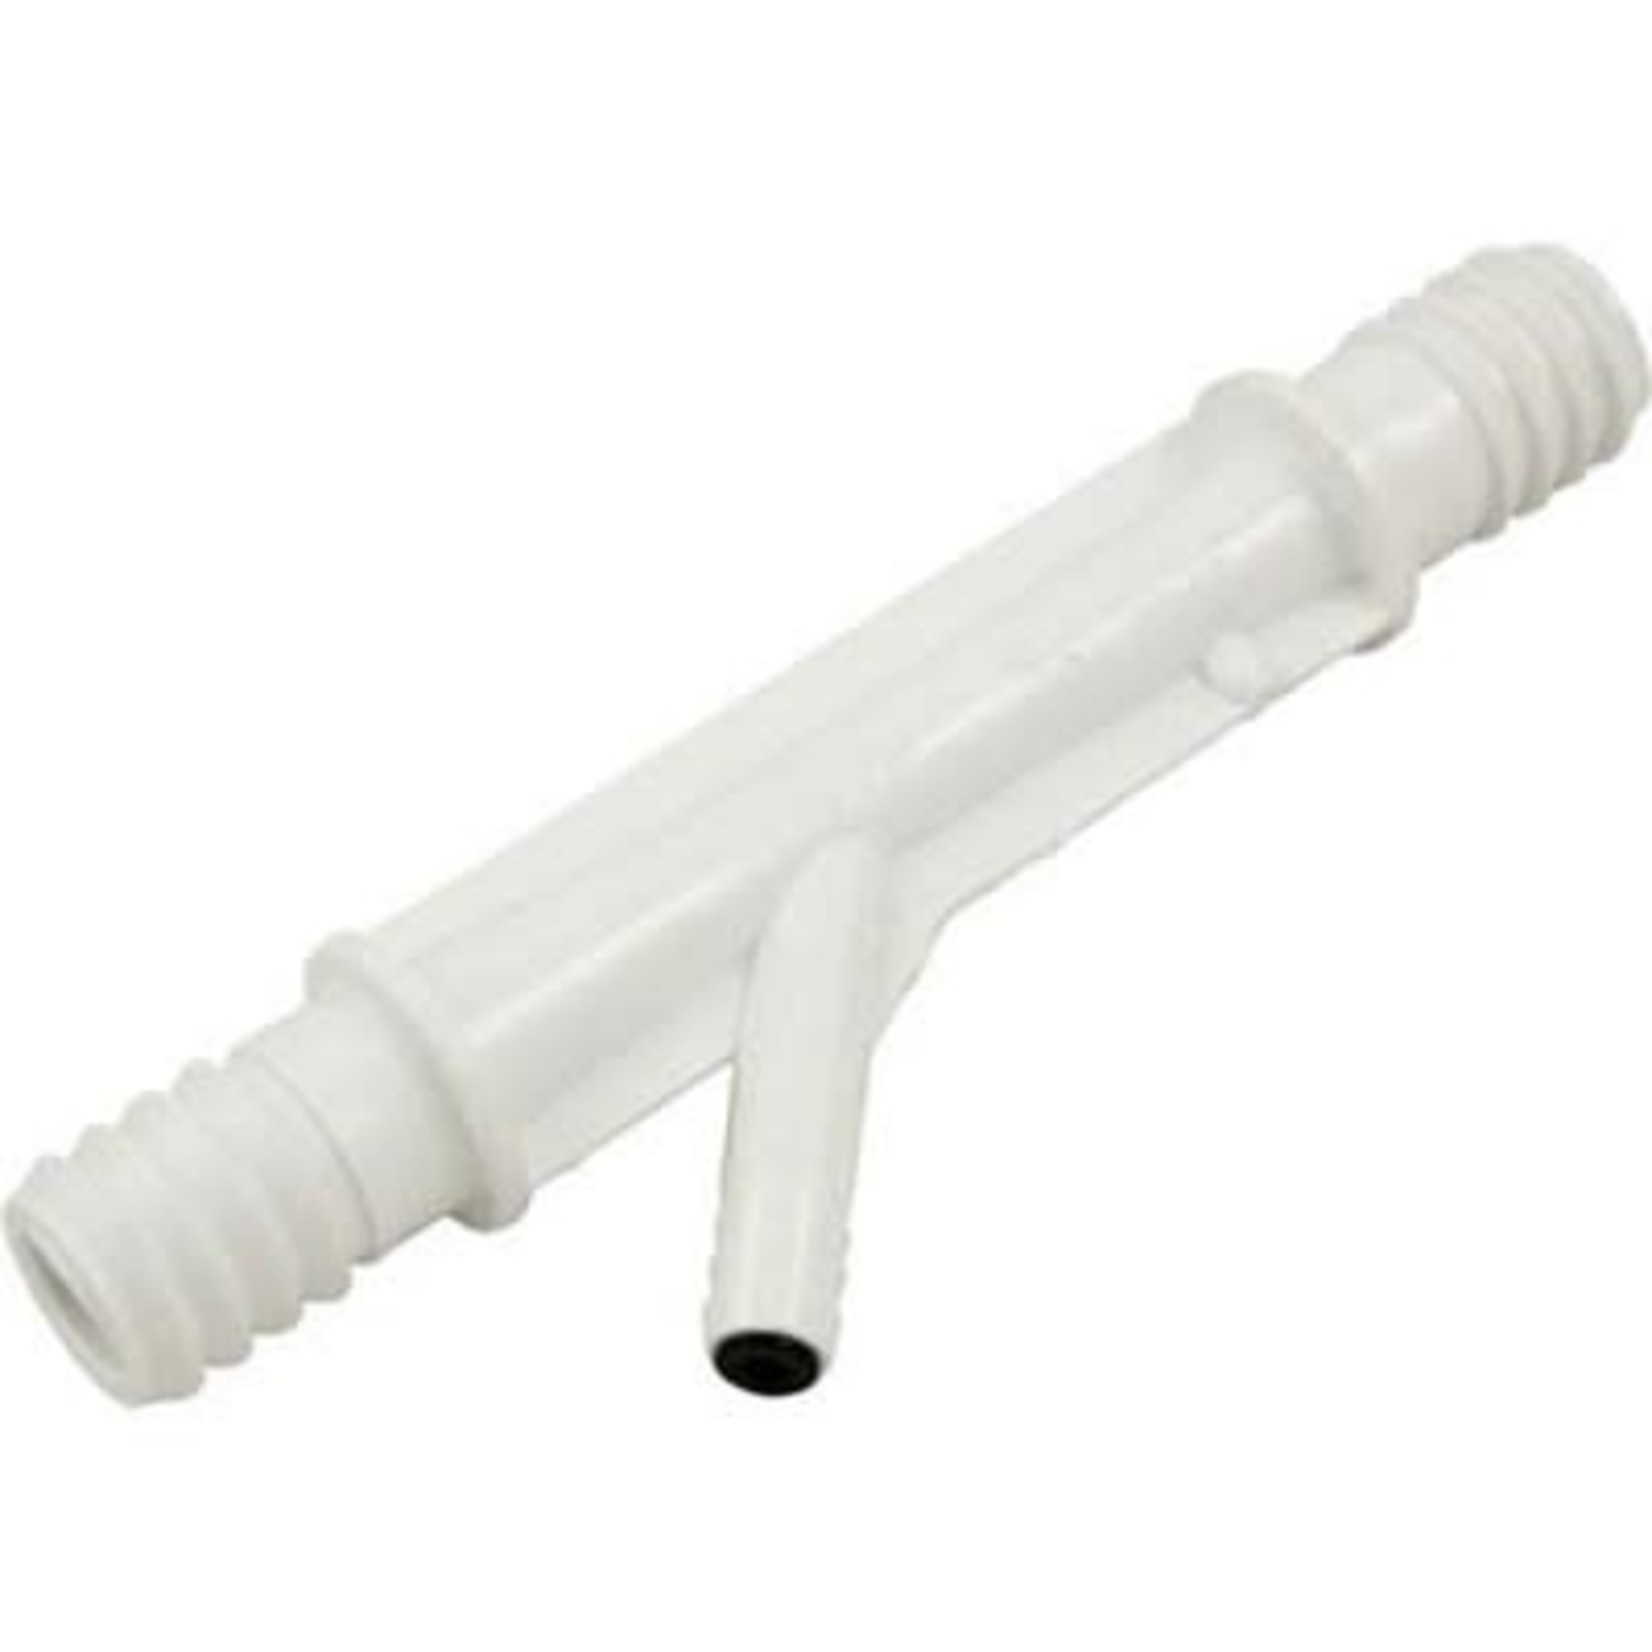 WaterWay Ozone Injector (3/4" RB x 3/4" RB x 3/4" RB)